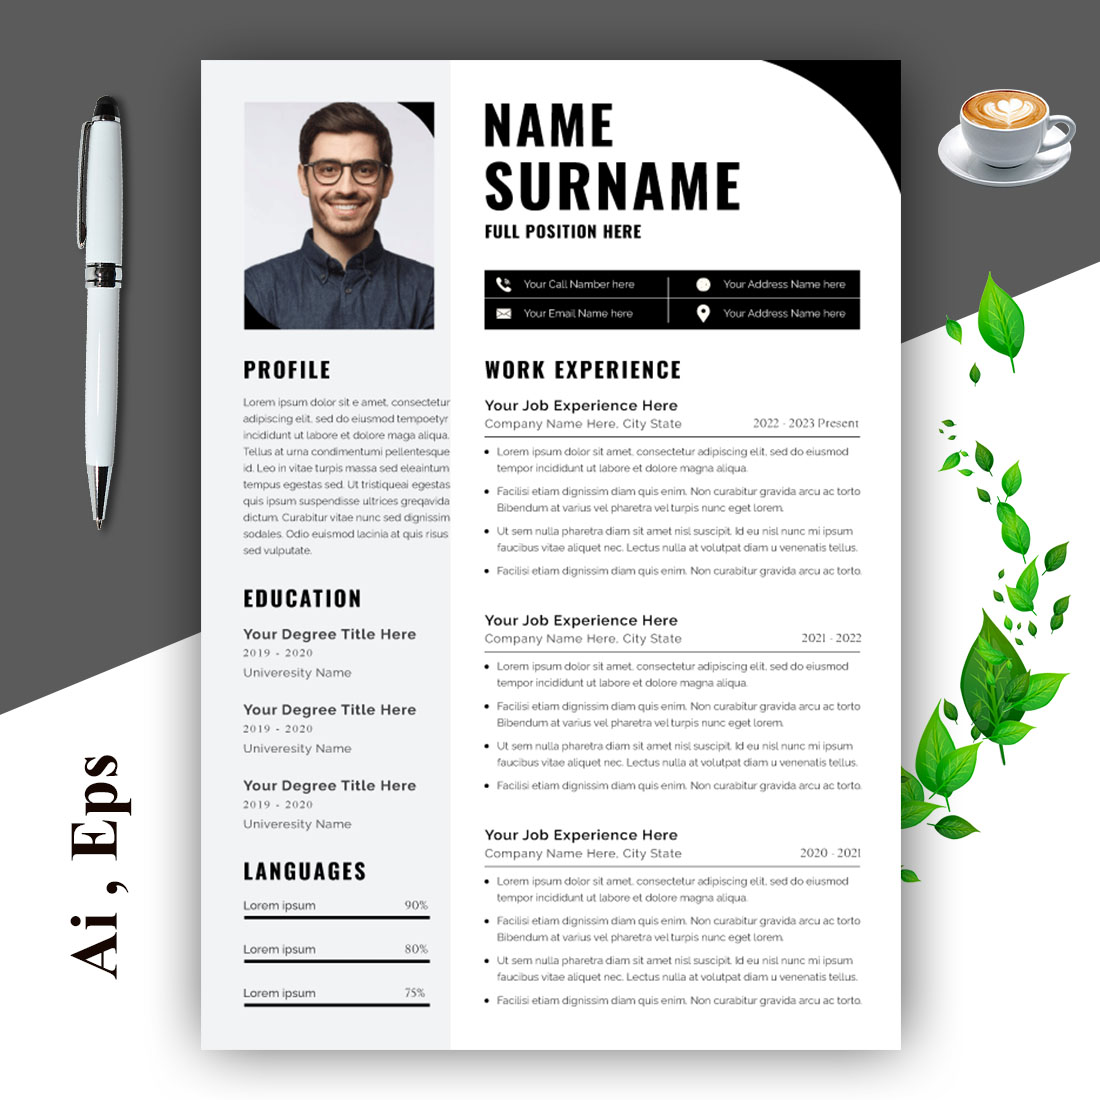 Professional Resume Design Template Gray Accent cover image.